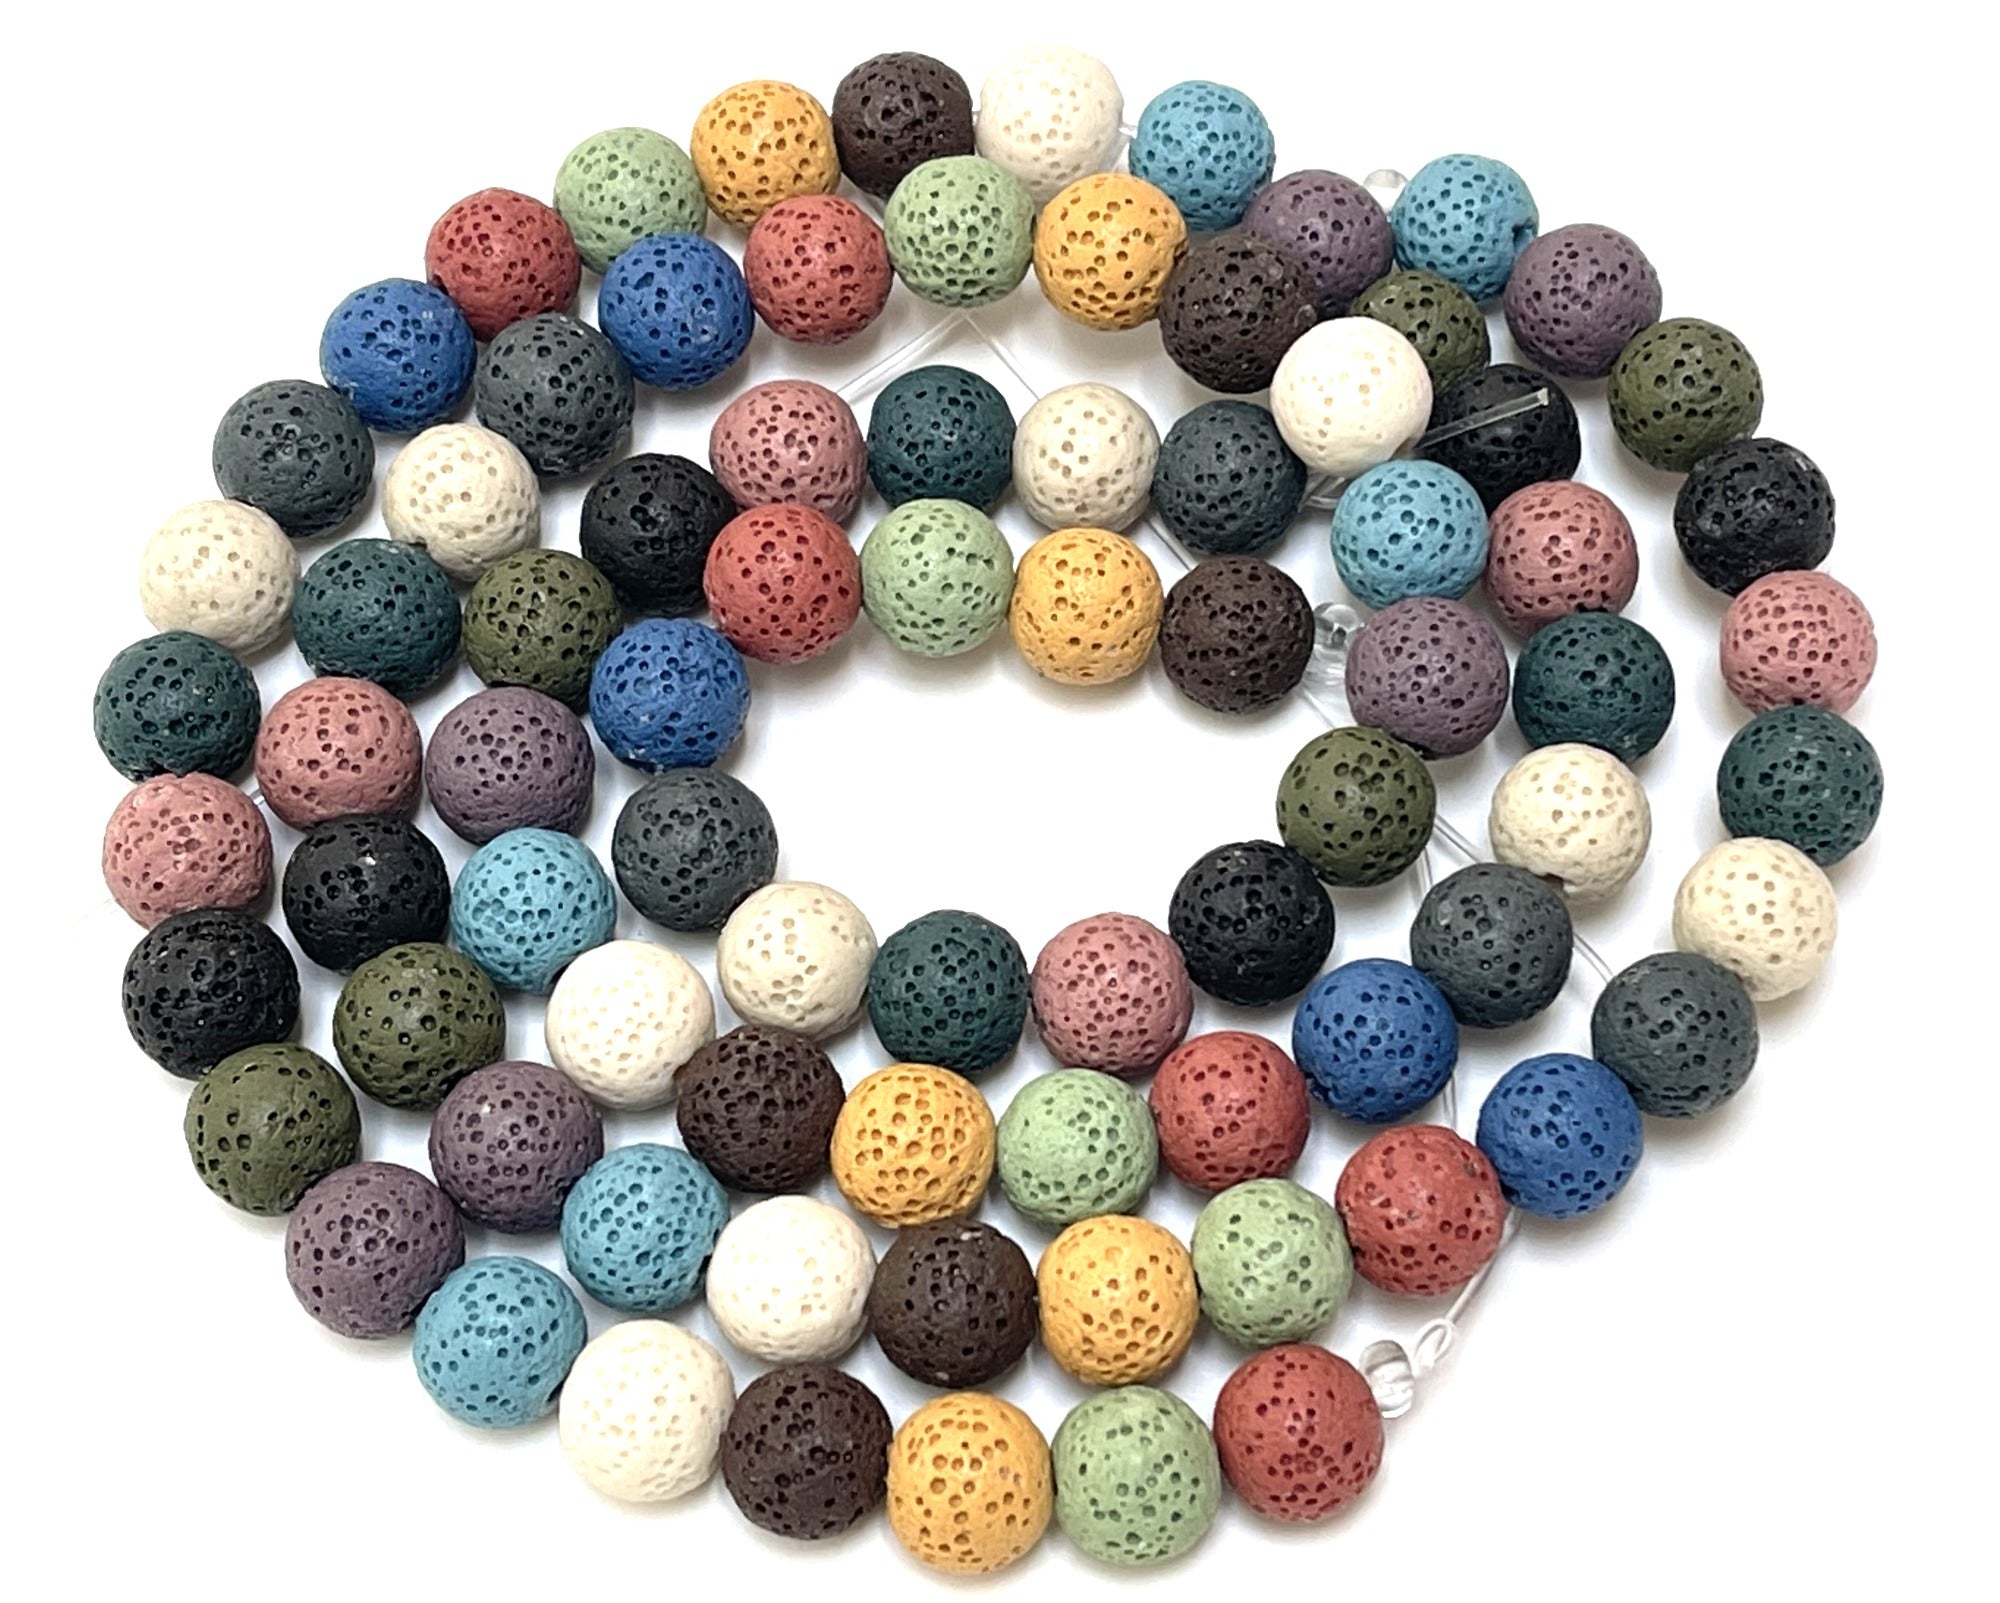 Lava Mix Color 6mm 8mm 10mm round beads 15.5" strand - Oz Beads 